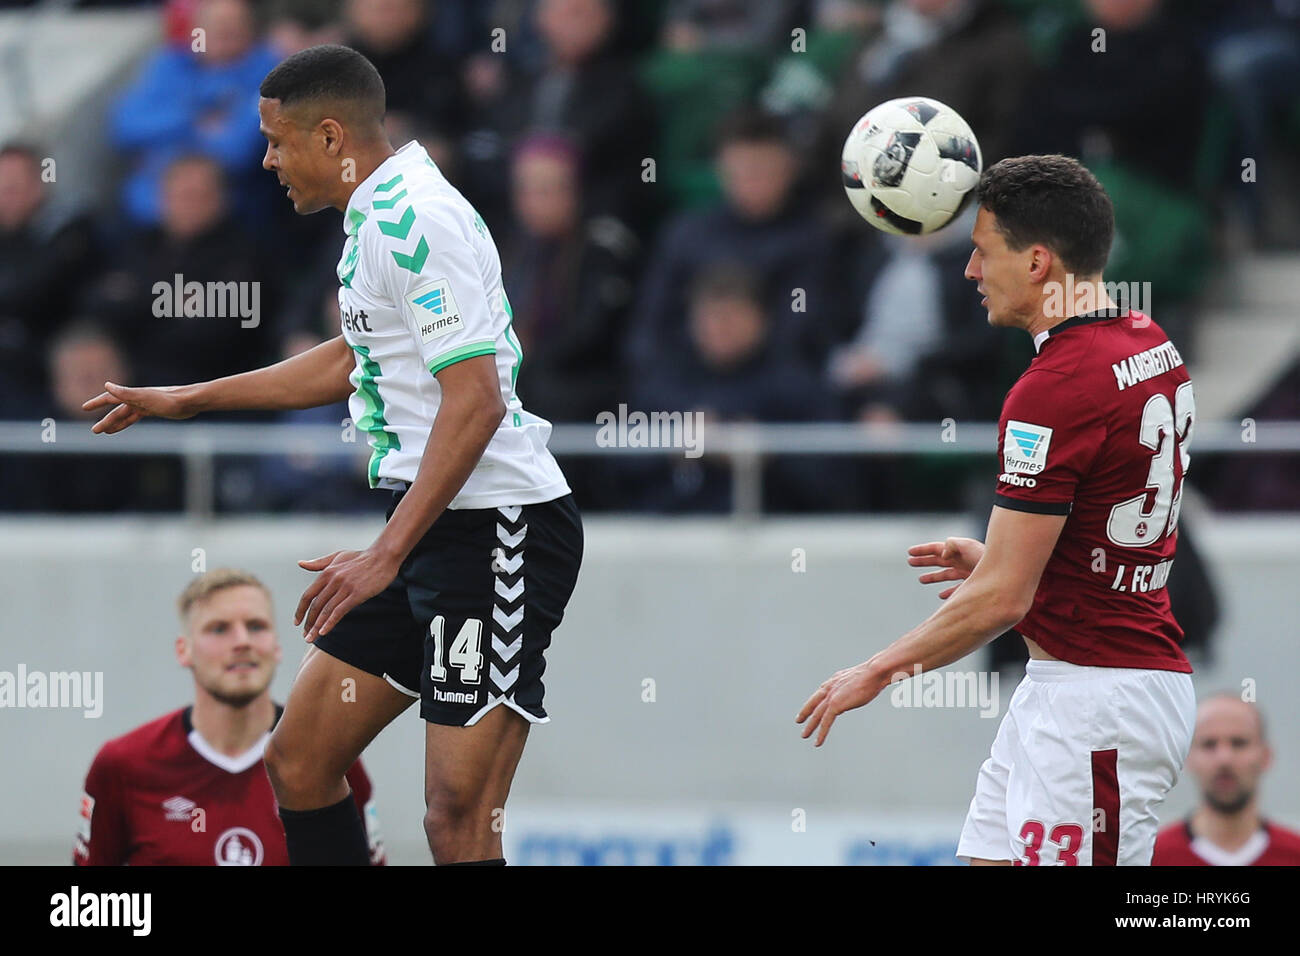 Fuerth, Germany. 5th Mar, 2017. Fuerth's Mathis Bolly (l) and Nuremberg's Georg Margreitter in action during the 2nd Bundesliga soccer match between SpVgg Greuther Fuerth and 1. FC Nuremberg at the Stadion am Laubenweg in Fuerth, Germany, 5 March 2017. (EMBARGO CONDITIONS - ATTENTION: Due to the accreditation guidlines, the DFL only permits the publication and utilisation of up to 15 pictures per match on the internet and in online media during the match.) Photo: Daniel Karmann/dpa/Alamy Live News Stock Photo